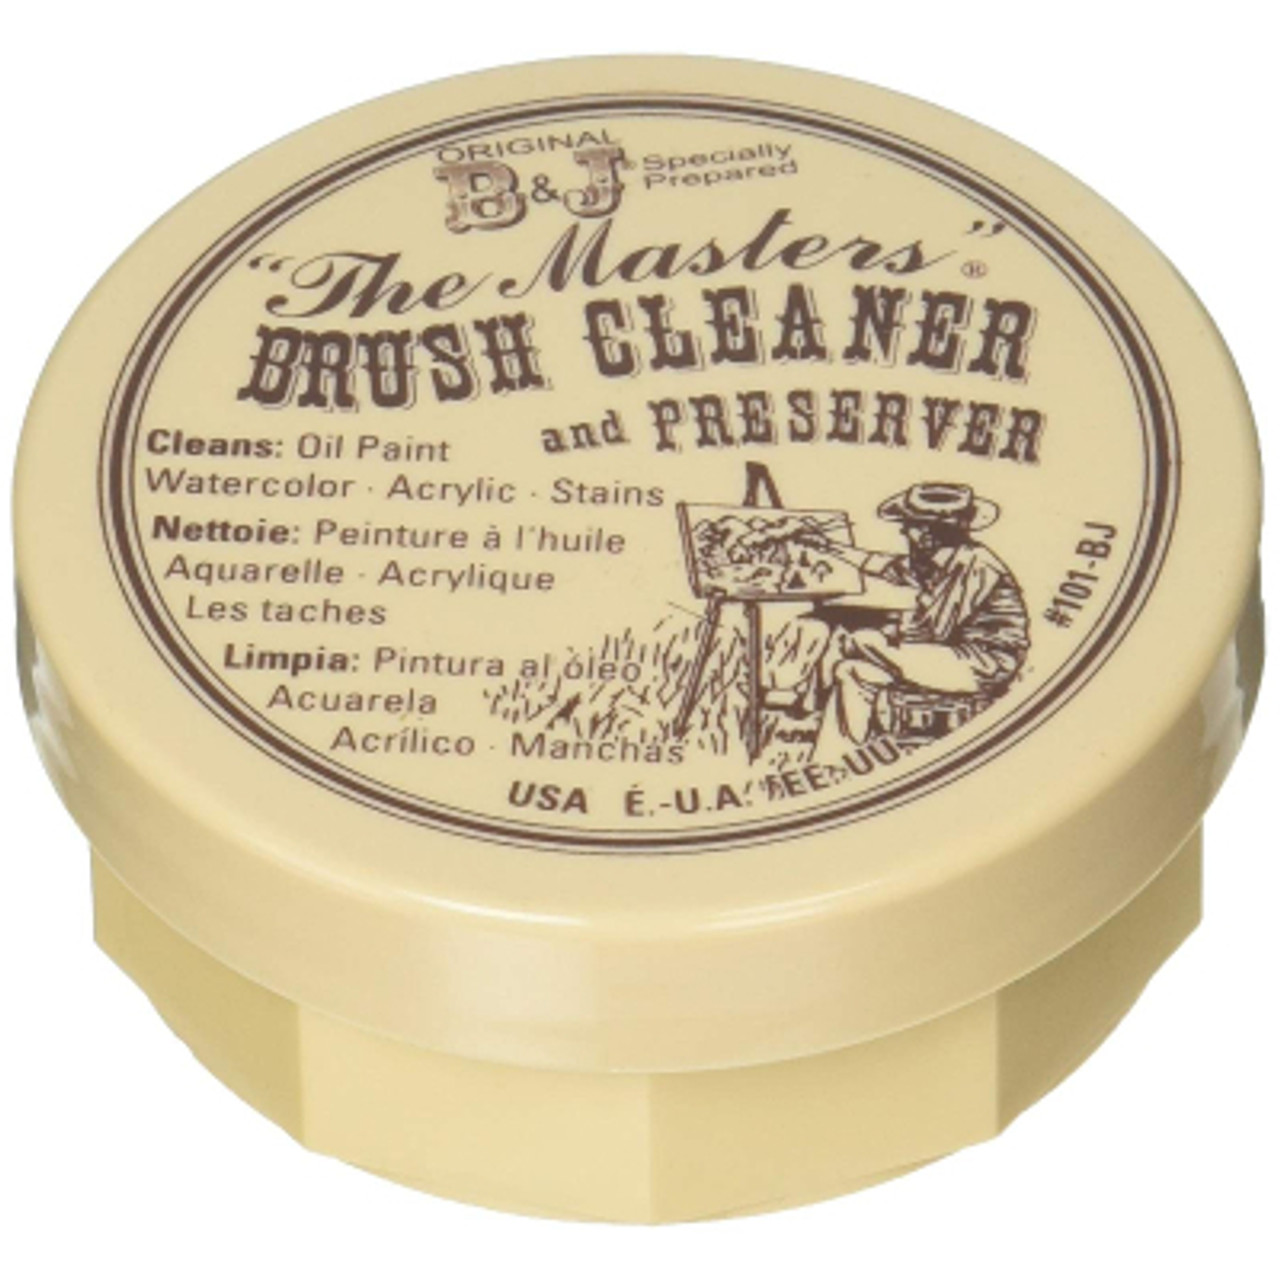 General's The Masters Brush Cleaner and Preserver Mini 0.25 oz